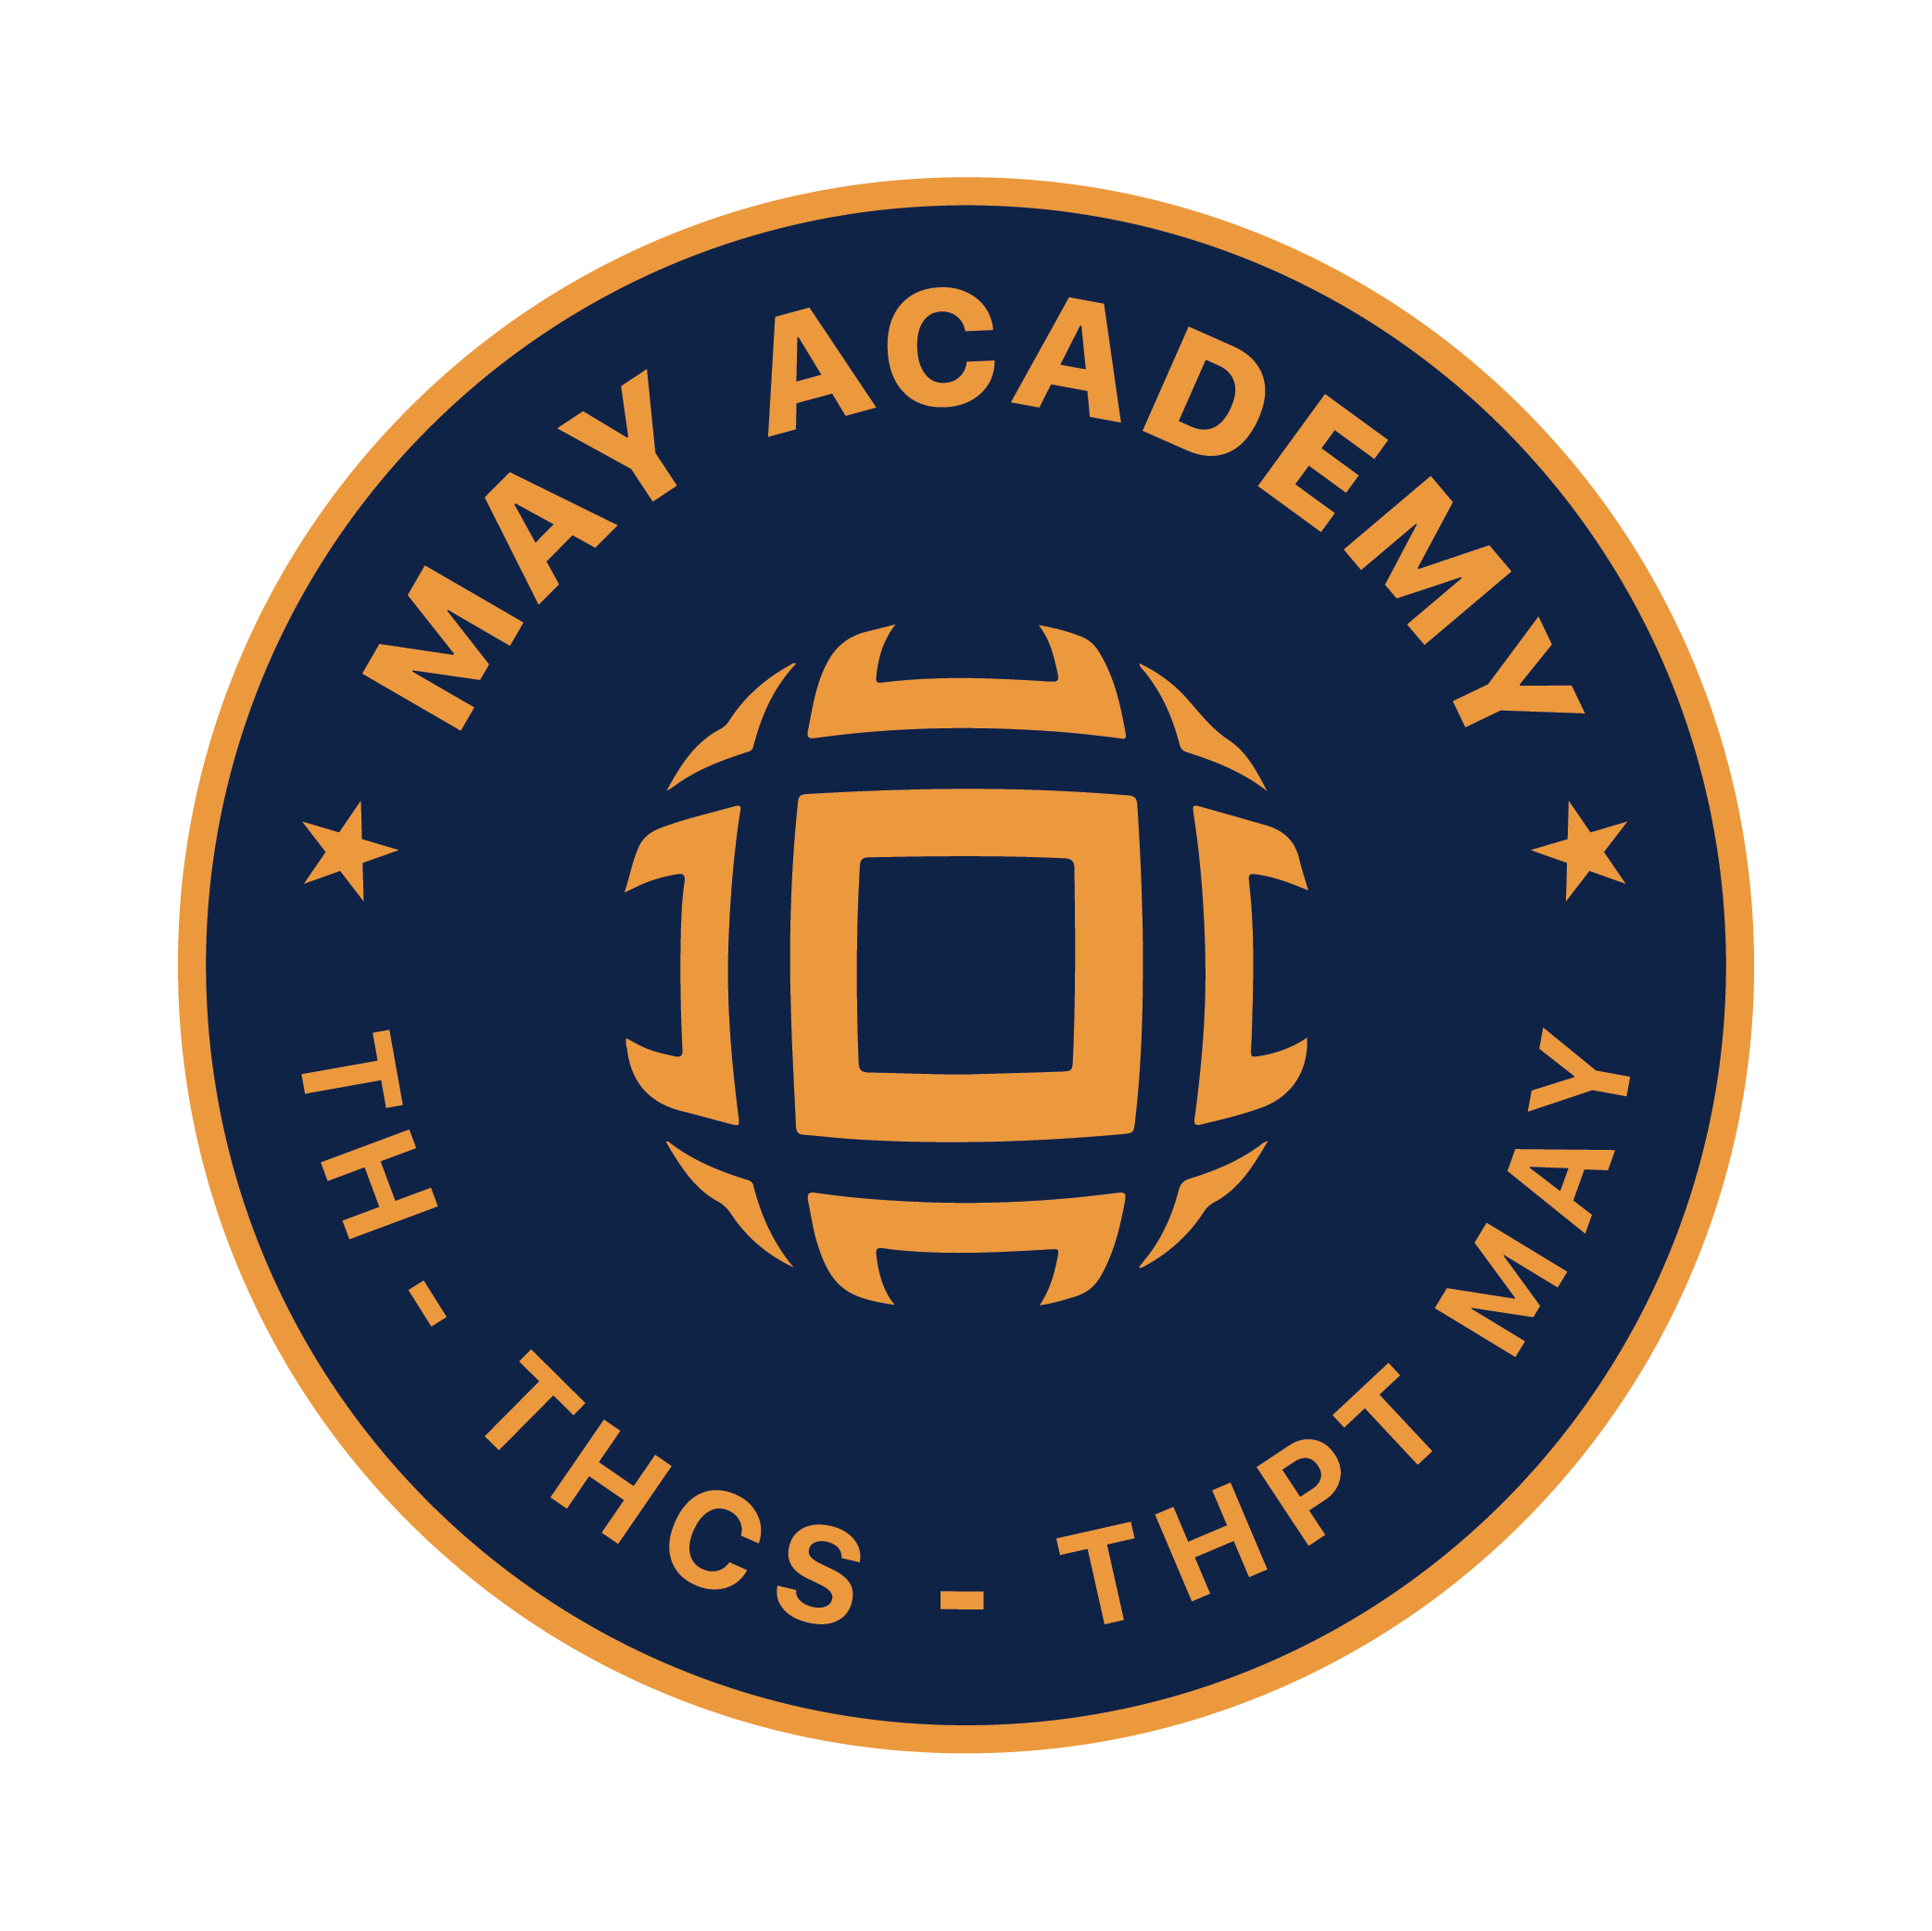 TRƯỜNG THPT MAY ACADEMY